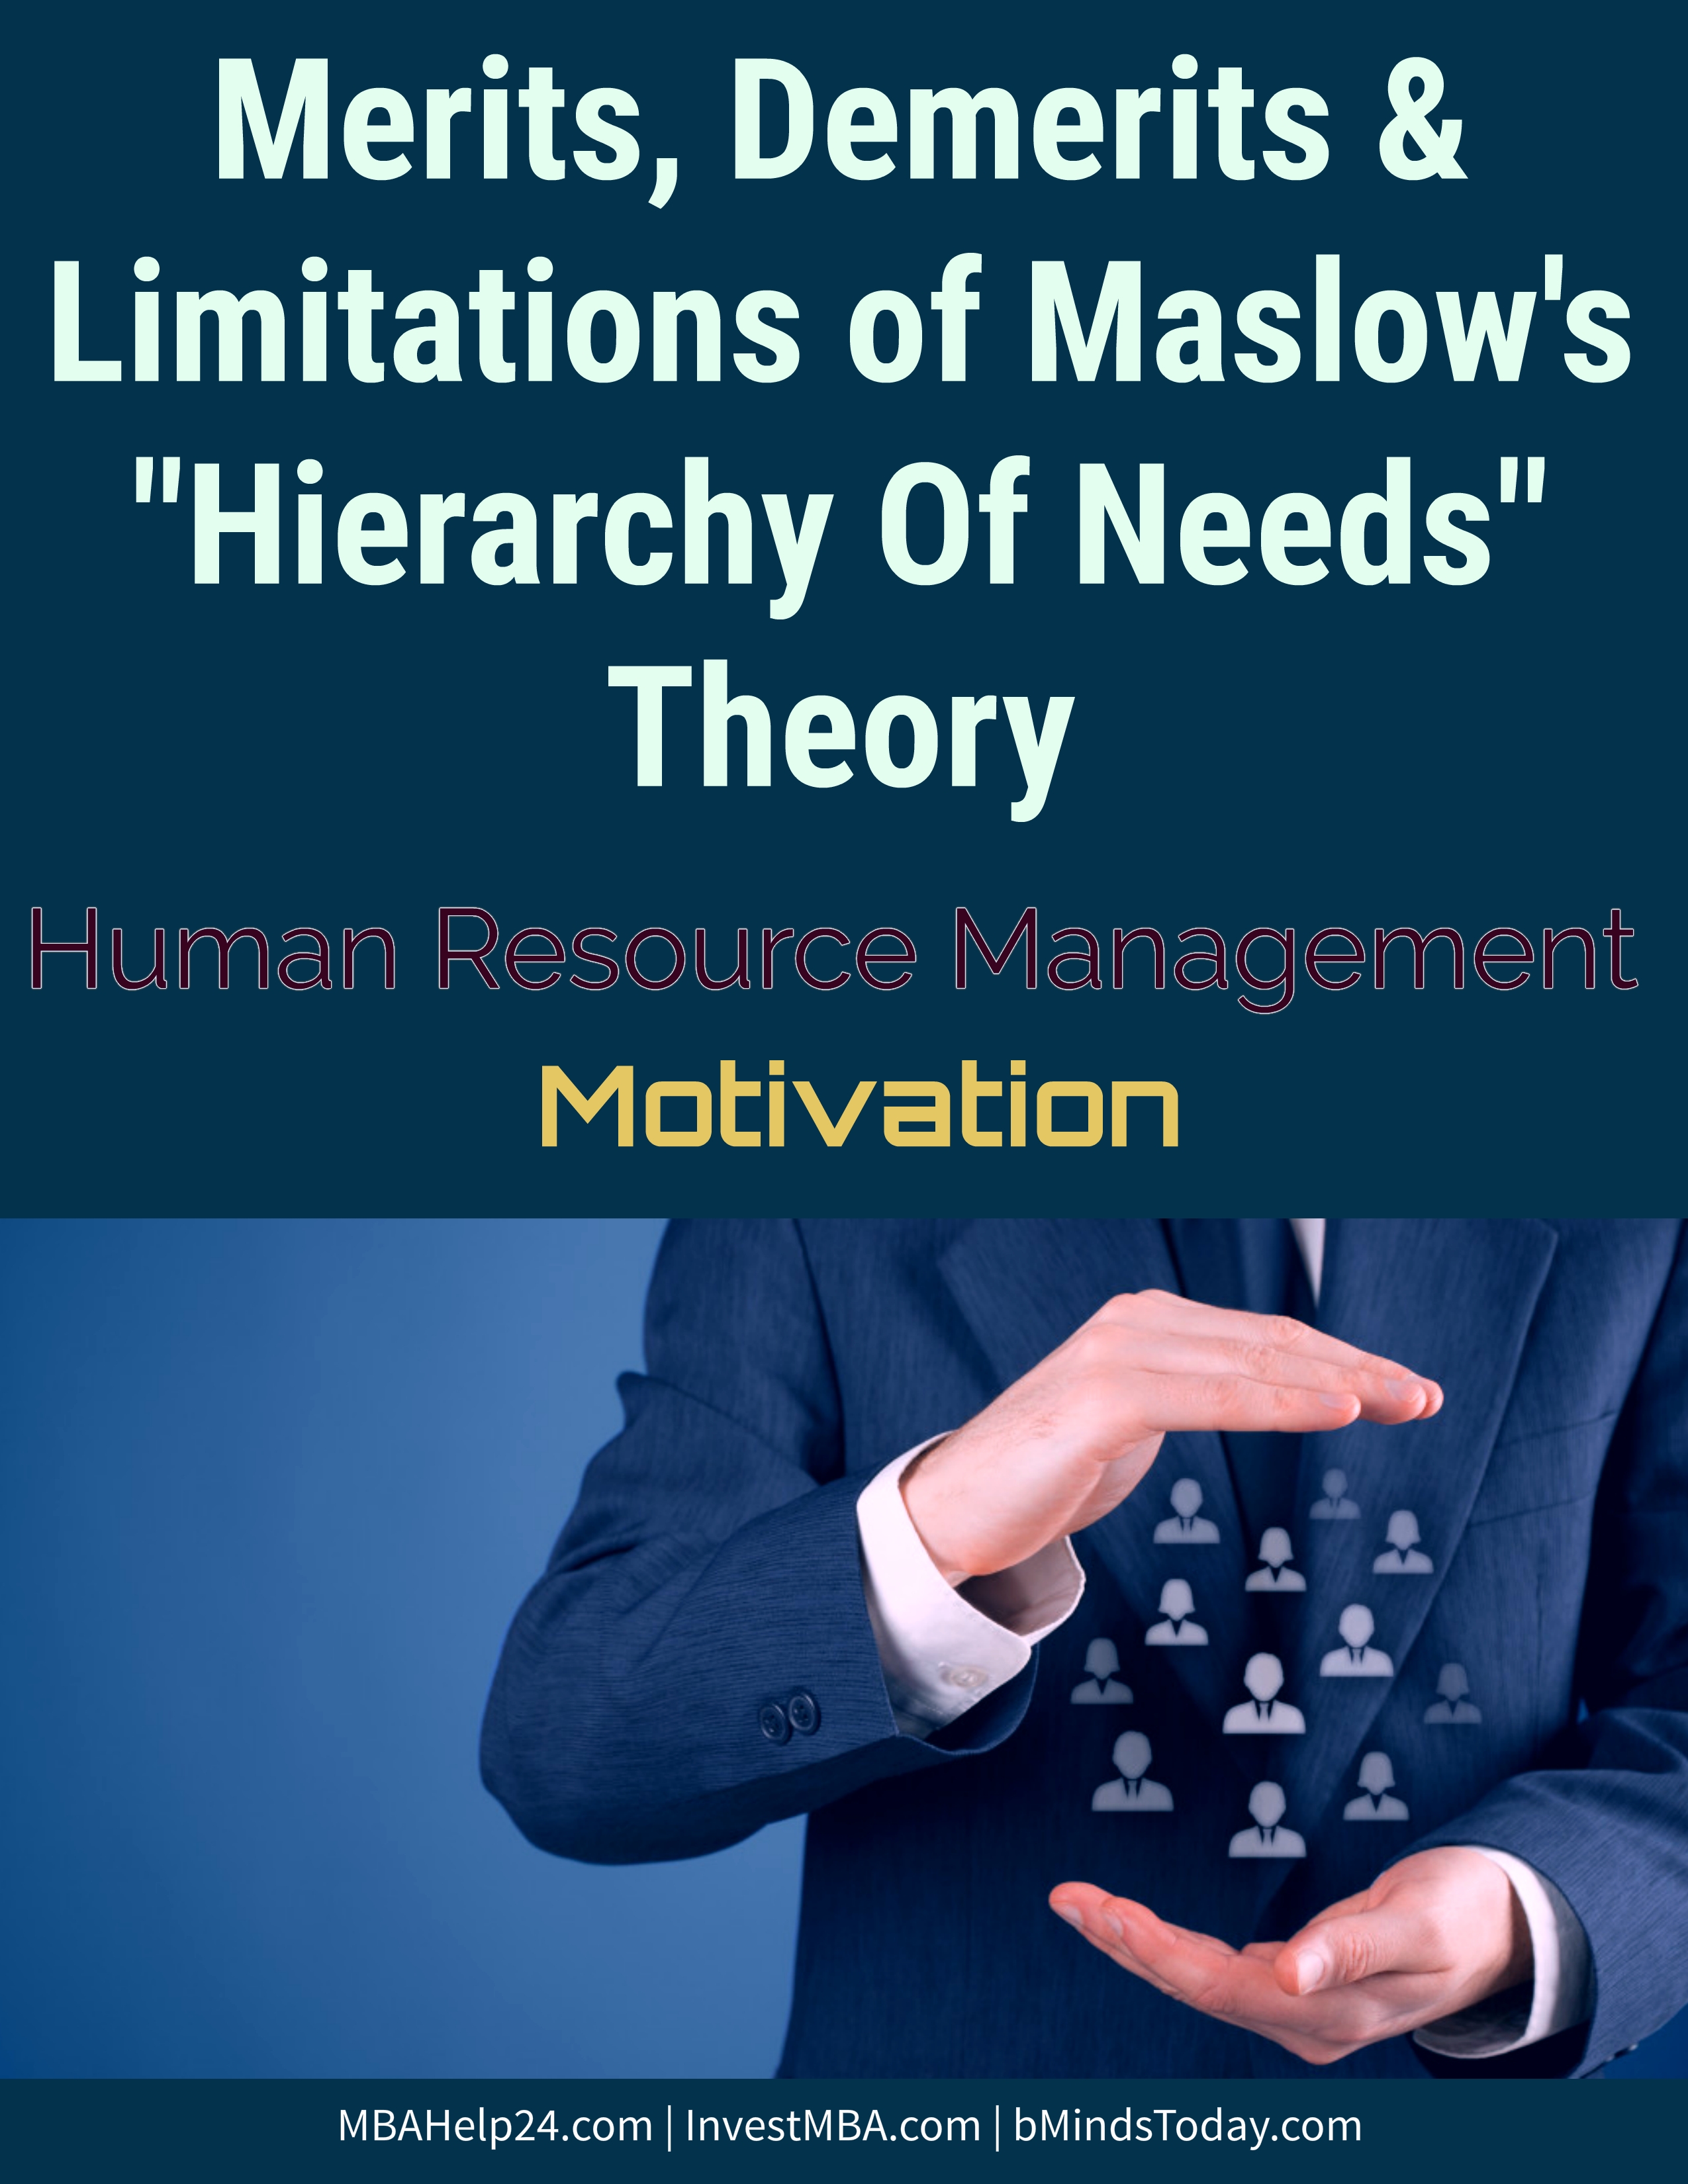 Advantages, Disadvantages and Limitations of Maslow's Hierarchy of Need Theory hierarchy of needs Limitations Of Maslow’s &#8216;Hierarchy of Needs’ Theory | Merits | Demerits advantages disadvatages and limitations of maslow hierarchy of needs theory limitations of maslow ’s hierarchy of needs theory | merits Limitations Of Maslow ’s Hierarchy of Needs Theory | Merits advantages disadvatages and limitations of maslow hierarchy of needs theory